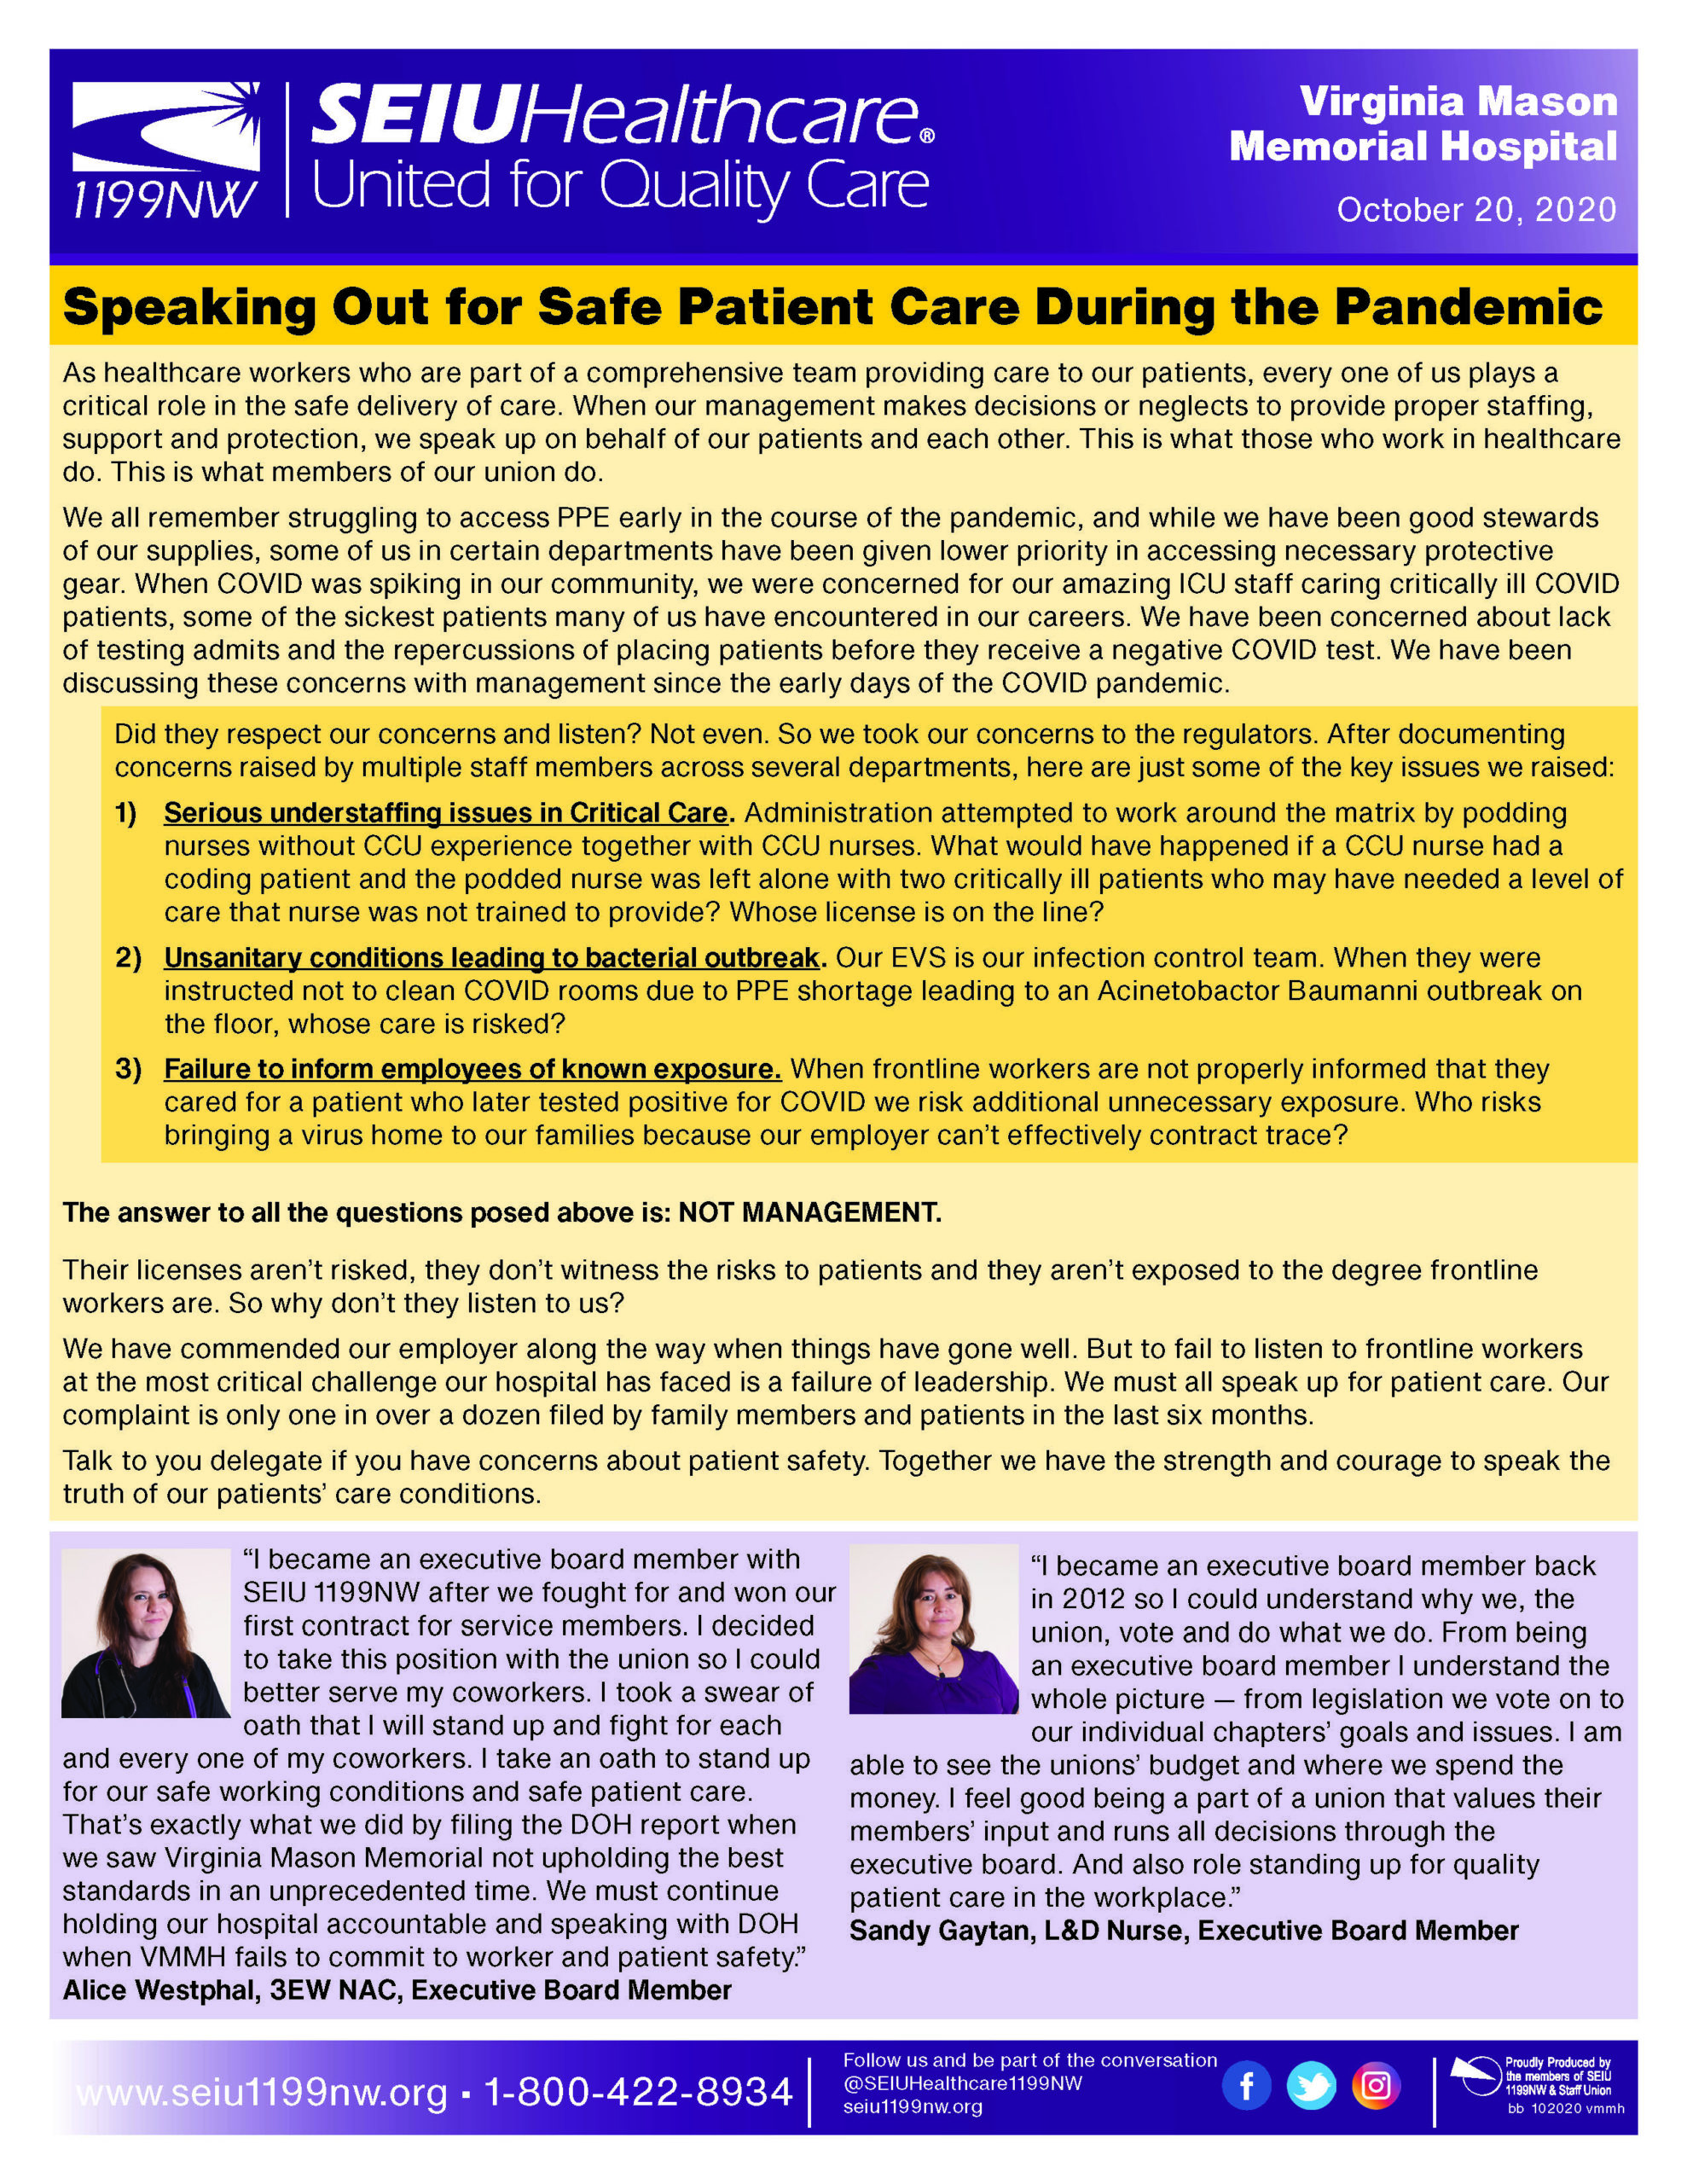 Speaking Out for Safe Patient Care During the Pandemic